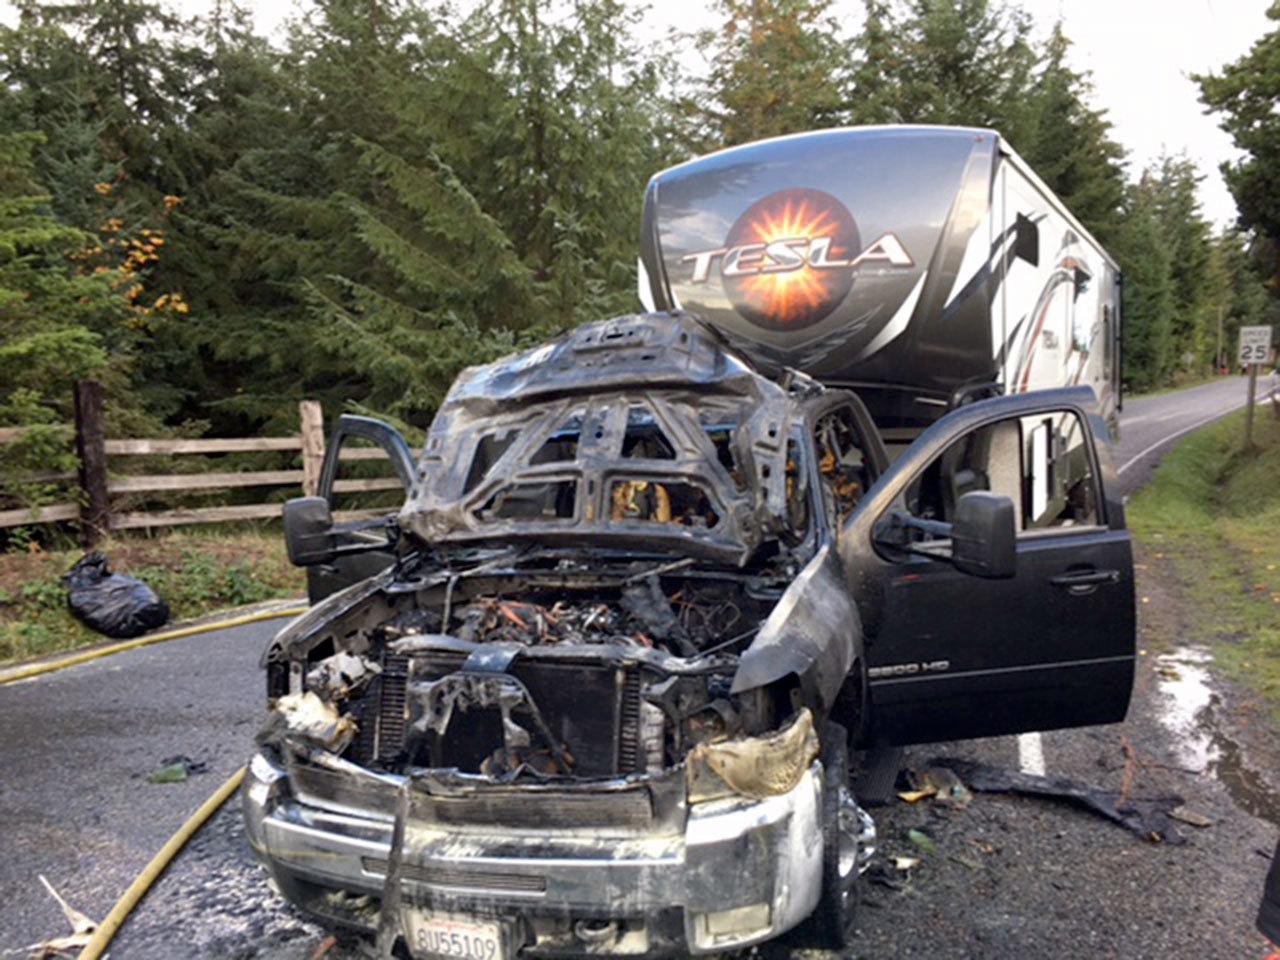 An engine fire destroyed this pickup truck in Port Angeles.